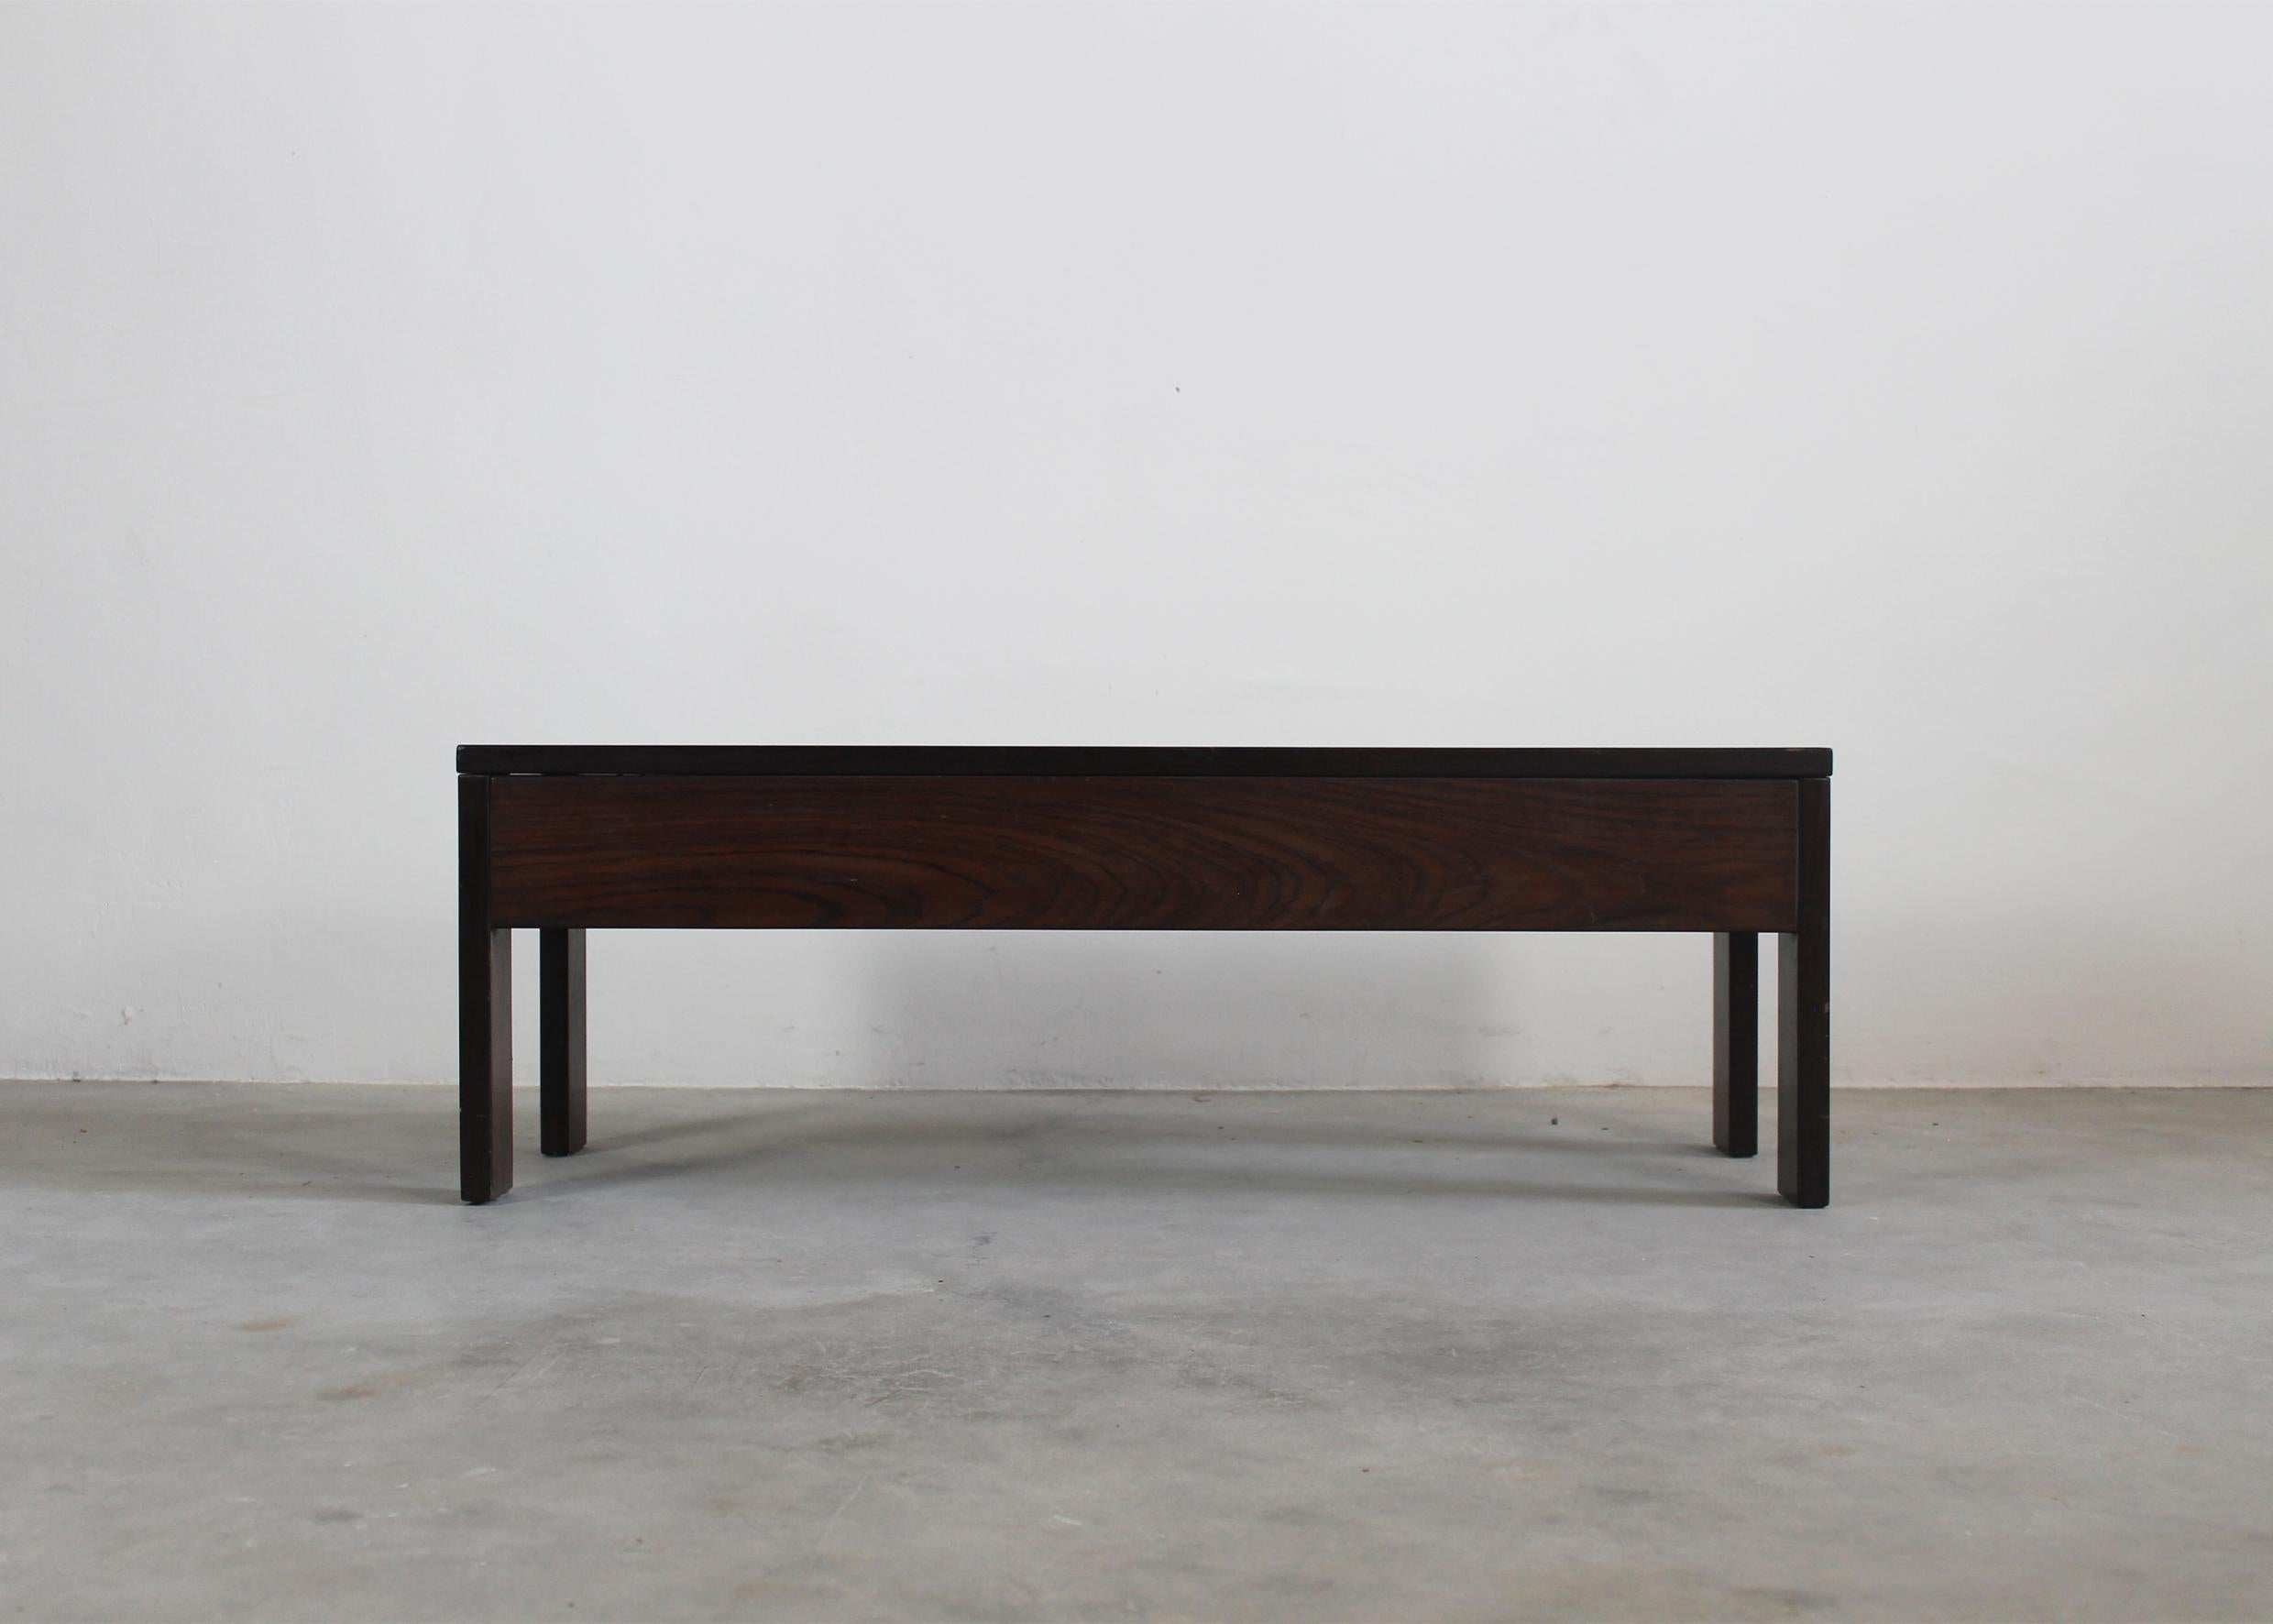 A rectangular low coffee table or sofa table entirely made in wood, designed by Ettore Sottsass for Poltronova, Agliana 1960s. 

The son of an architect, Ettore Sottsass Jr. (1917-2007) was born in Innsbruck, studied in Turin and graduated from